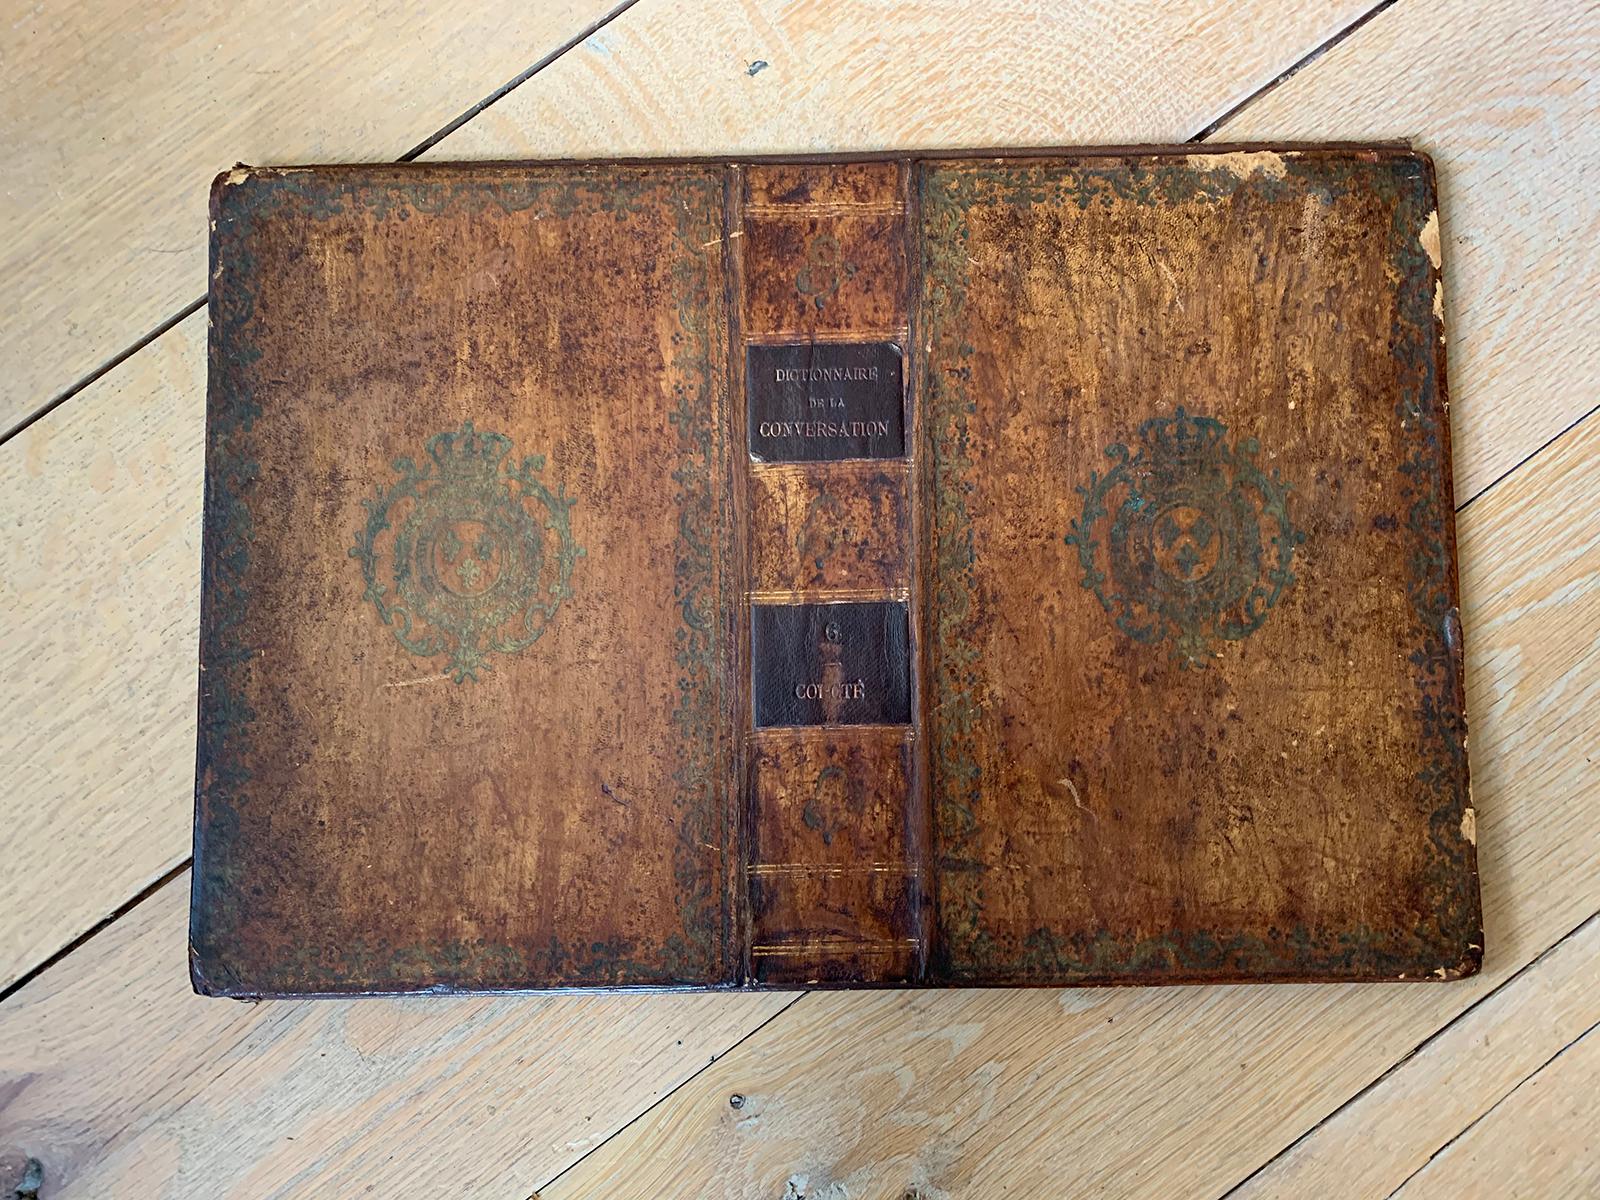 19th century French Dictionary cover as Folio 